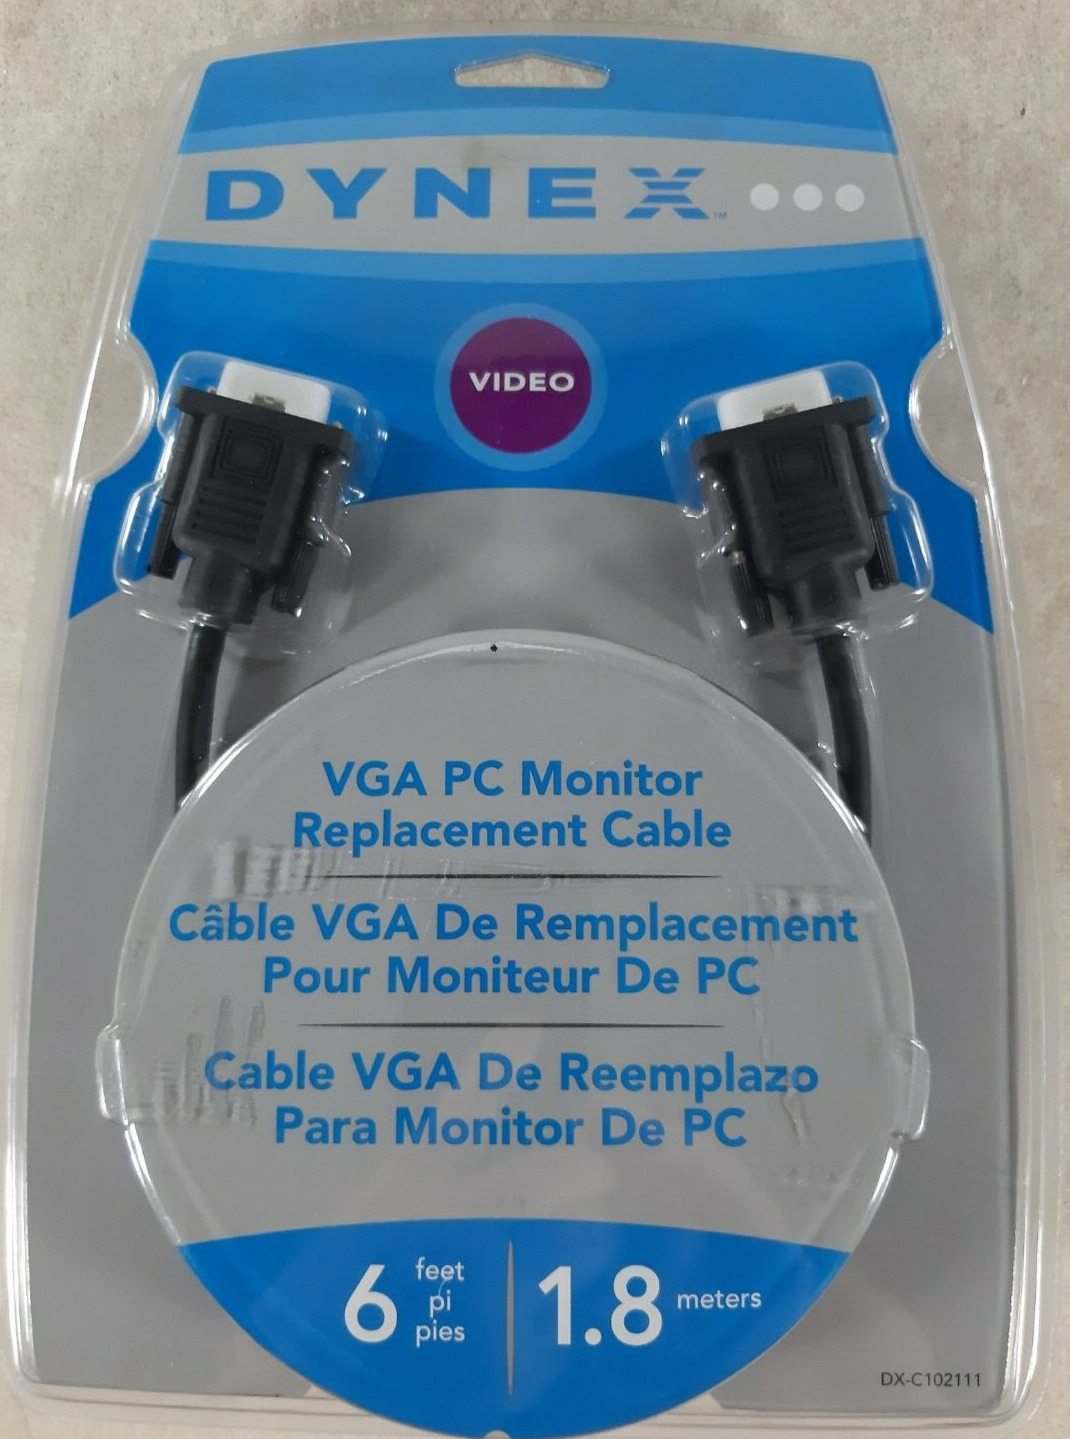 Dynex VGA PC Monitor Replacement Cable DX-C102111 6 Feet 1.8 Meters Dynex Video